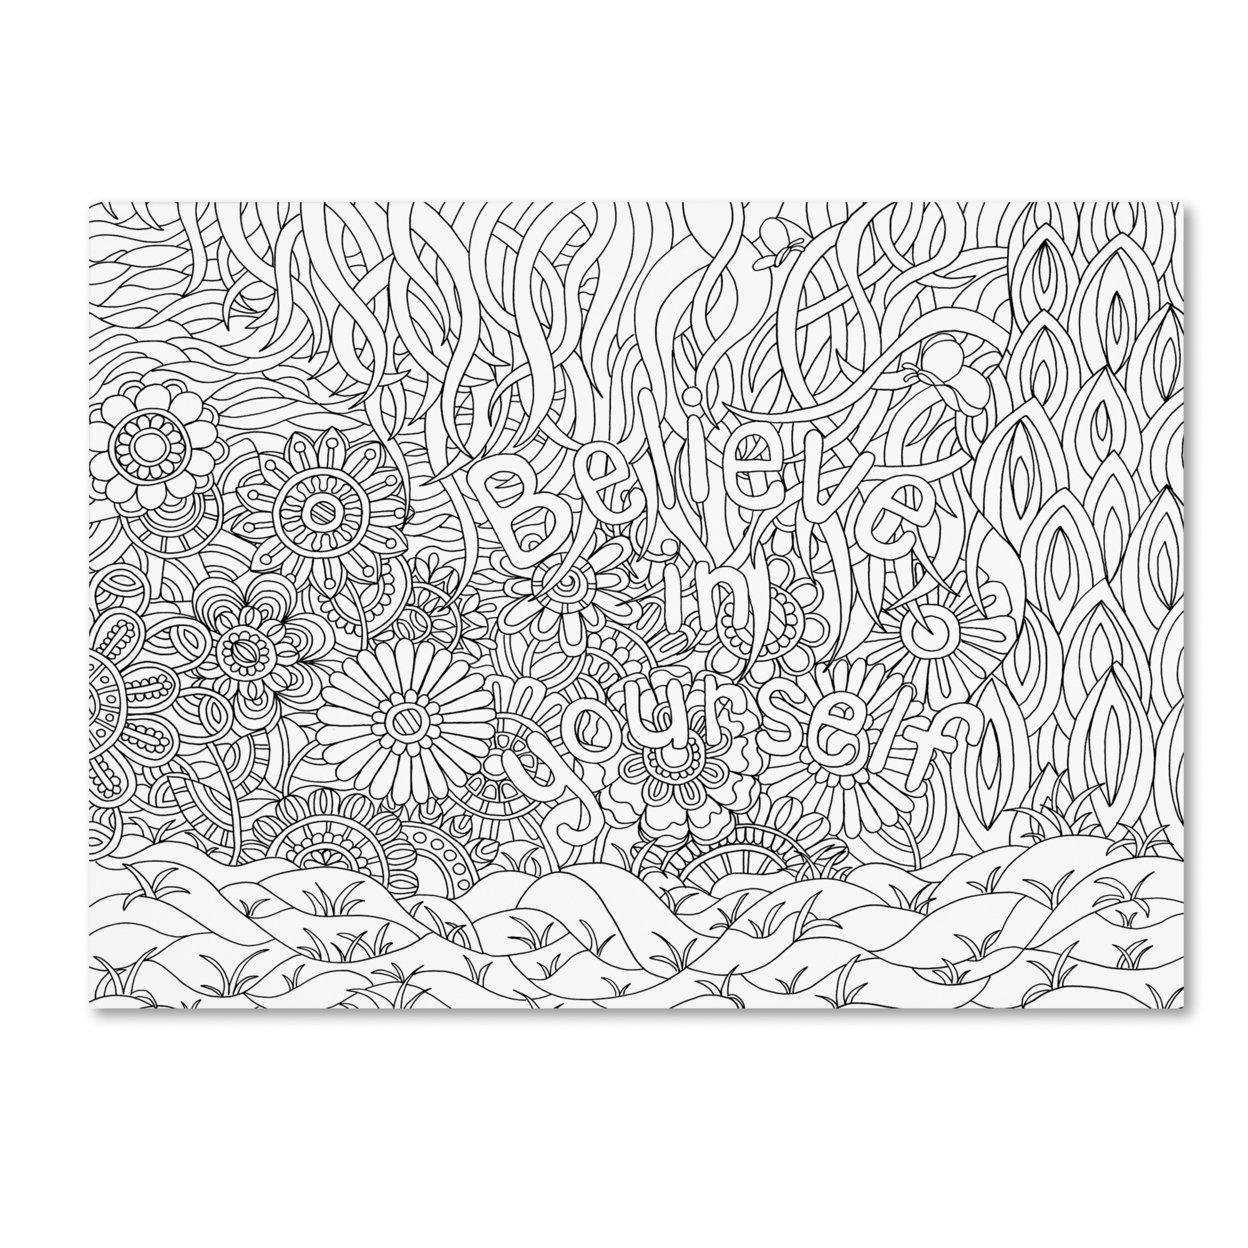 Kathy G. Ahrens 'Mixed Coloring Book 42' Canvas Wall Art 35 X 47 Inches